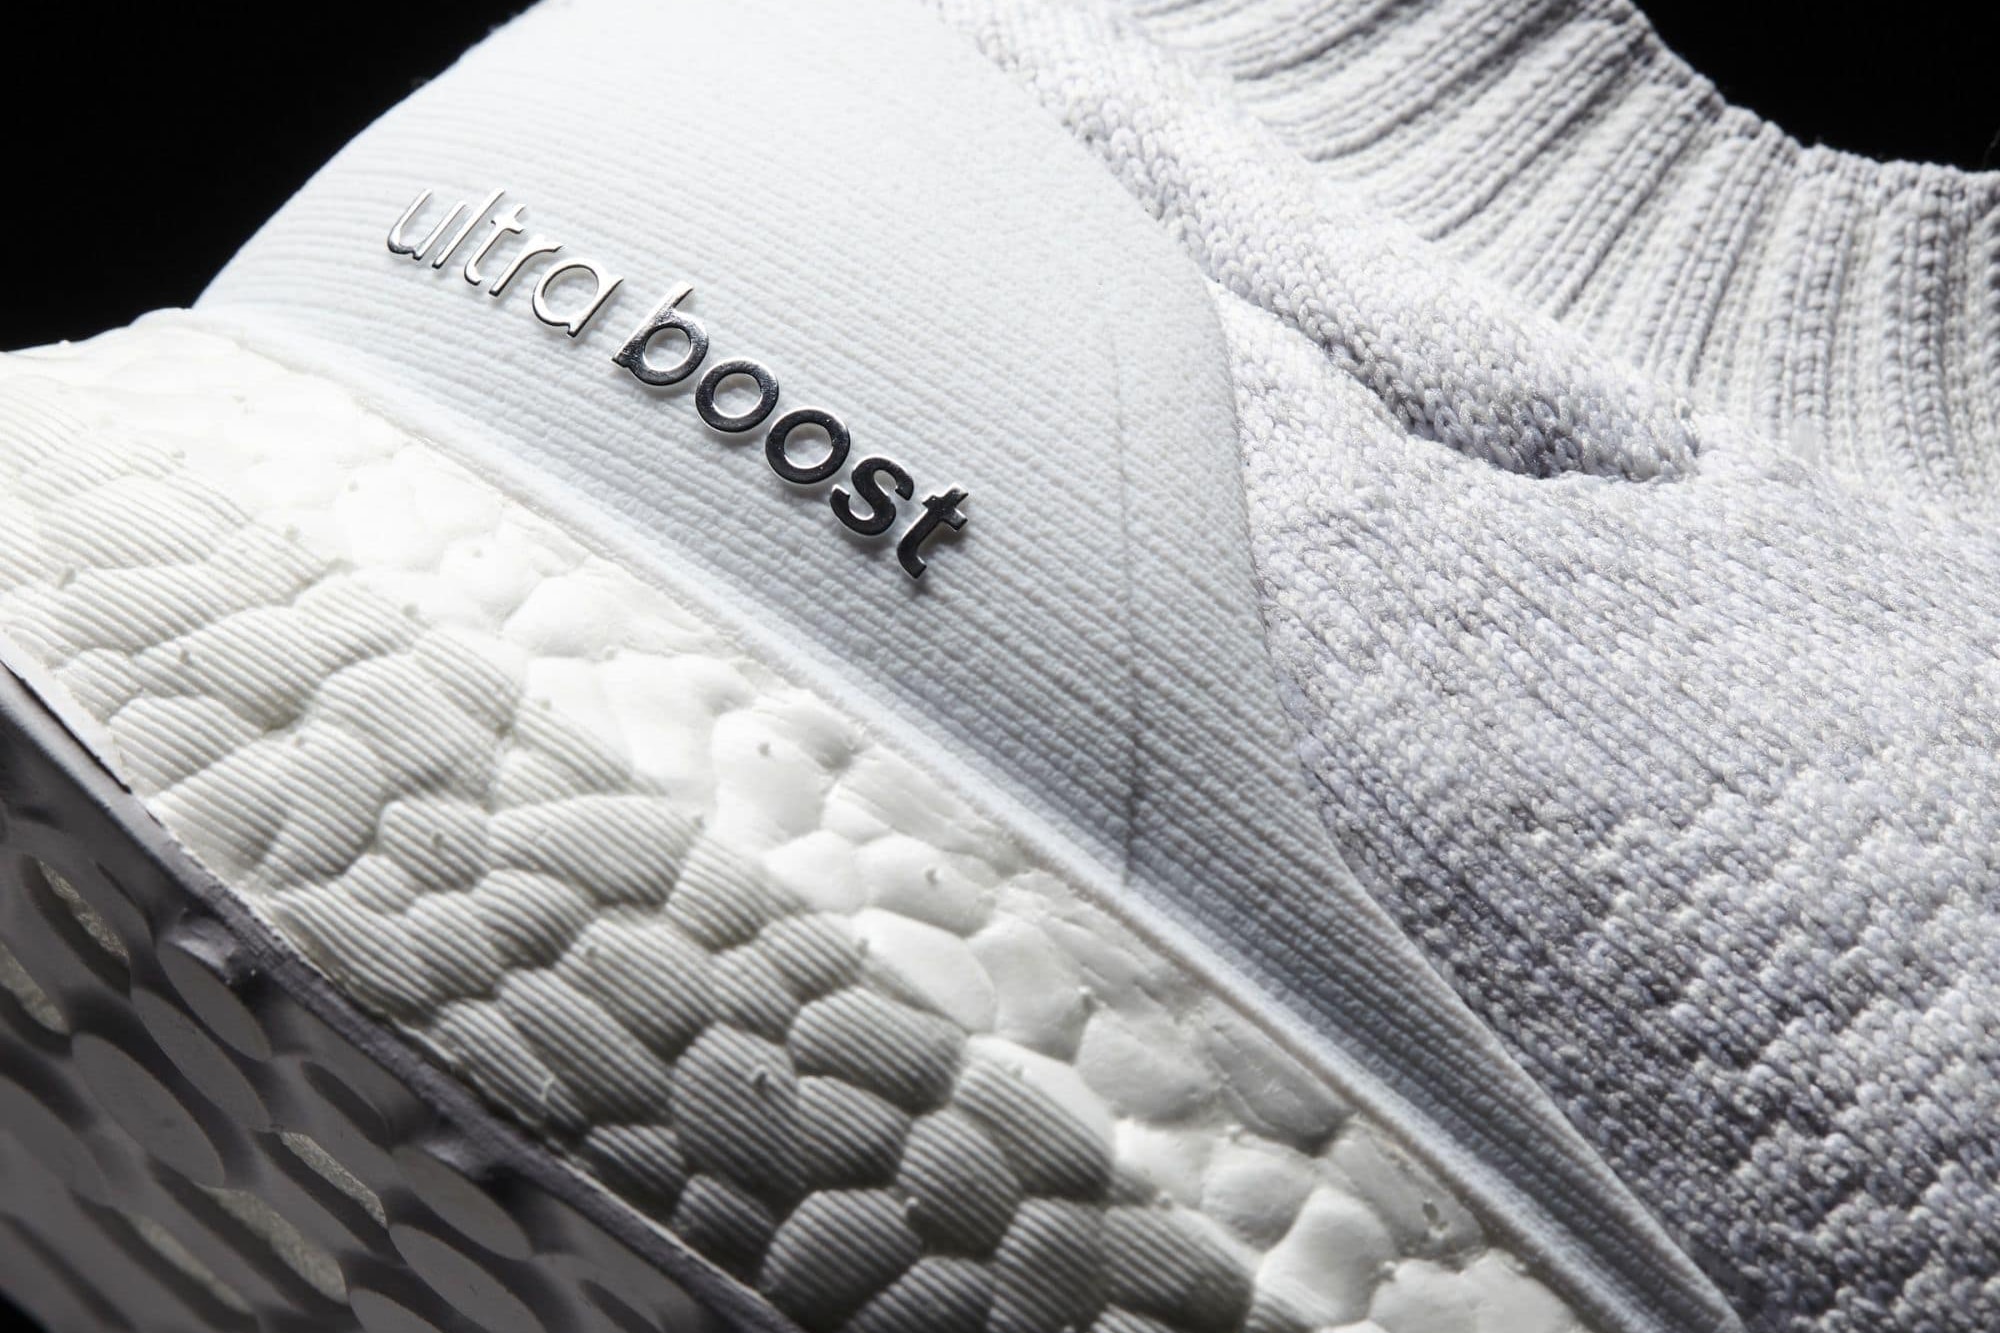 adidas UltraBOOST Uncaged "Triple White 2.0" Release Date Three Stripes BOOST Sole